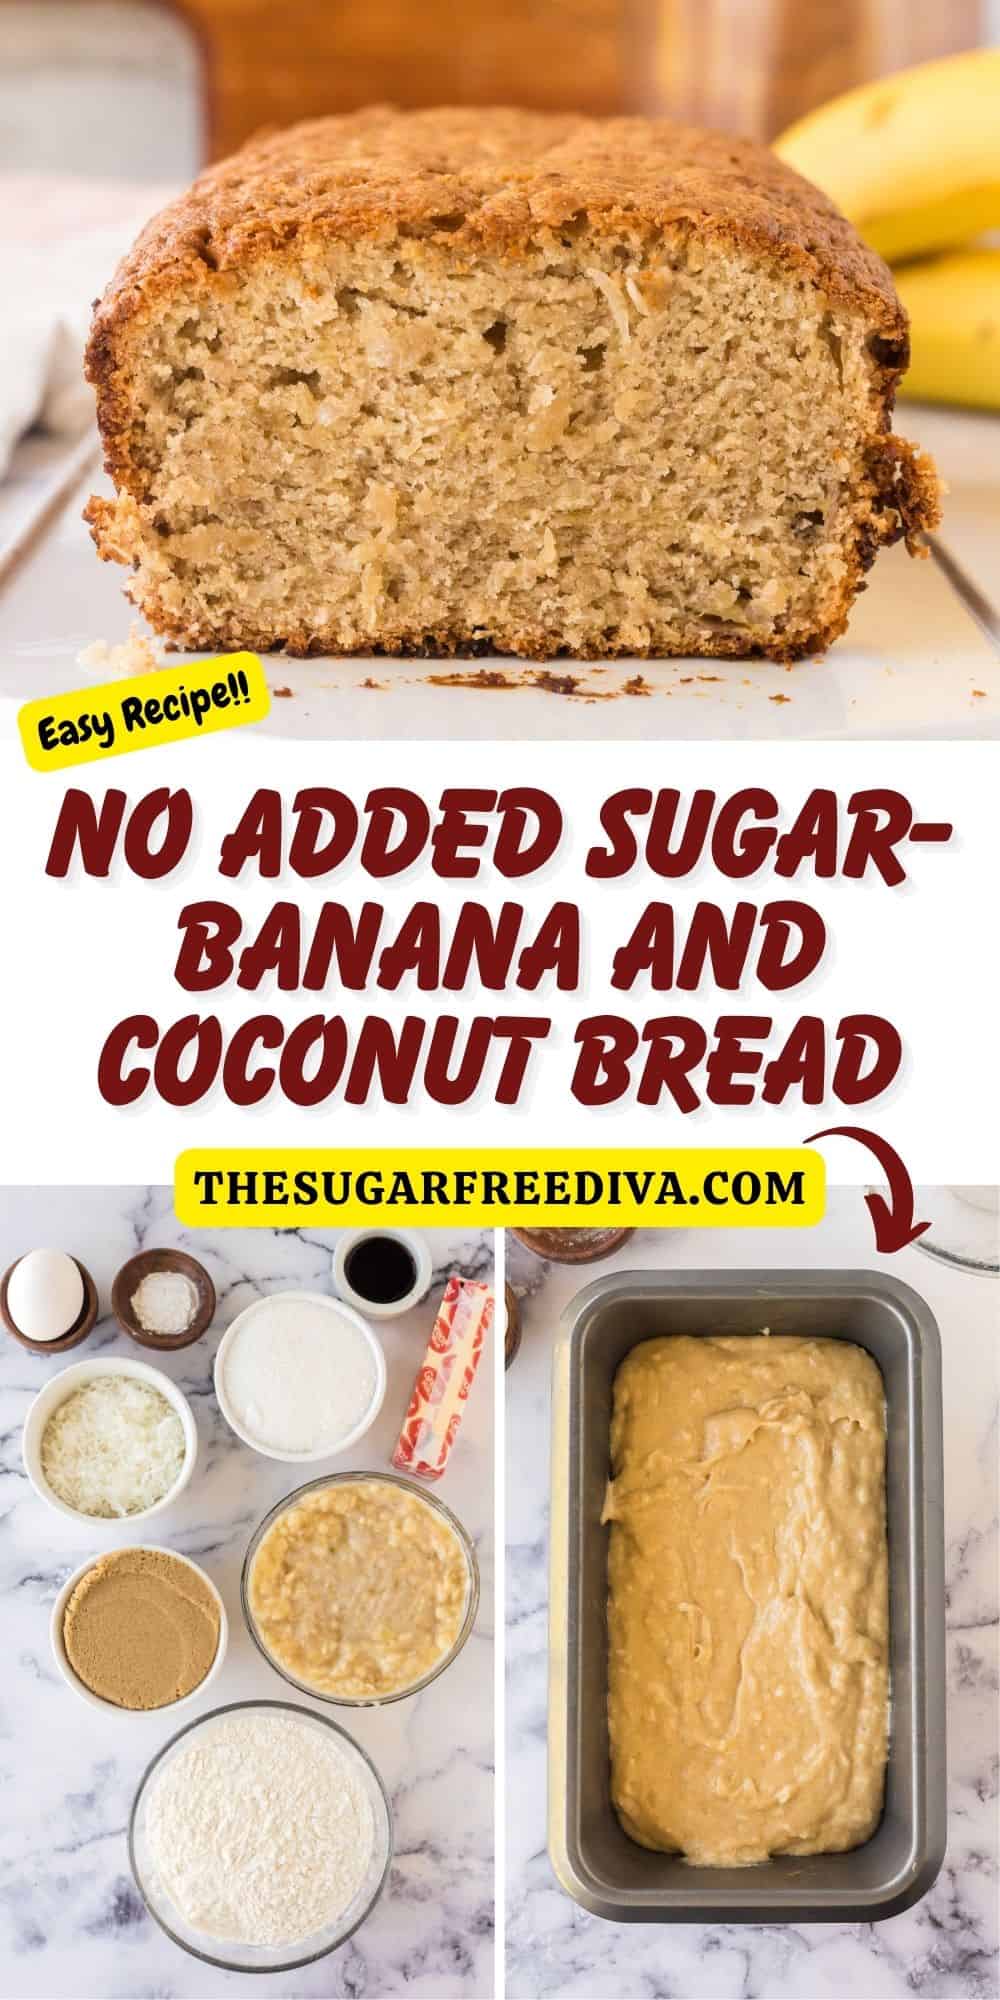 No Added Sugar- Banana and Coconut Bread, a simple and delicious recipe made with bananas and no added sugar. breakfast, brunch, or sandwich.